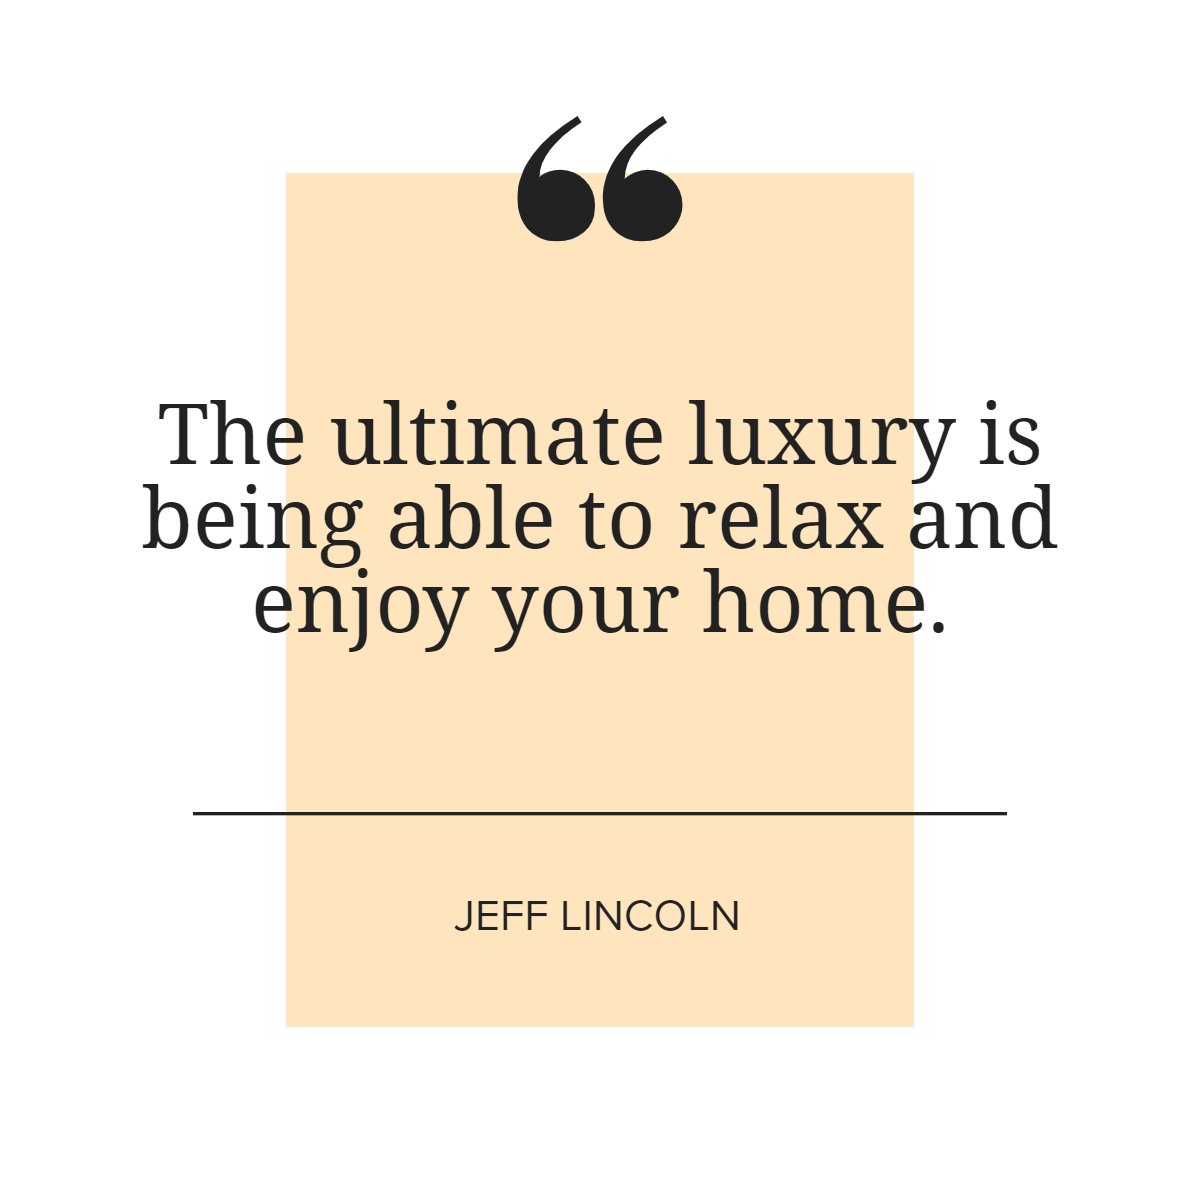 'The ultimate luxury is being able to relax and enjoy your home'
– Jeff Lincoln 📖

#luxurylifestyle    #luxury    #lovemyhome    #home    #lifestyle    #jefflincoln    #quote    #quoteoftheday✏️
#themikepaigeteam #homesellingtips #homebuying #dcrealestate